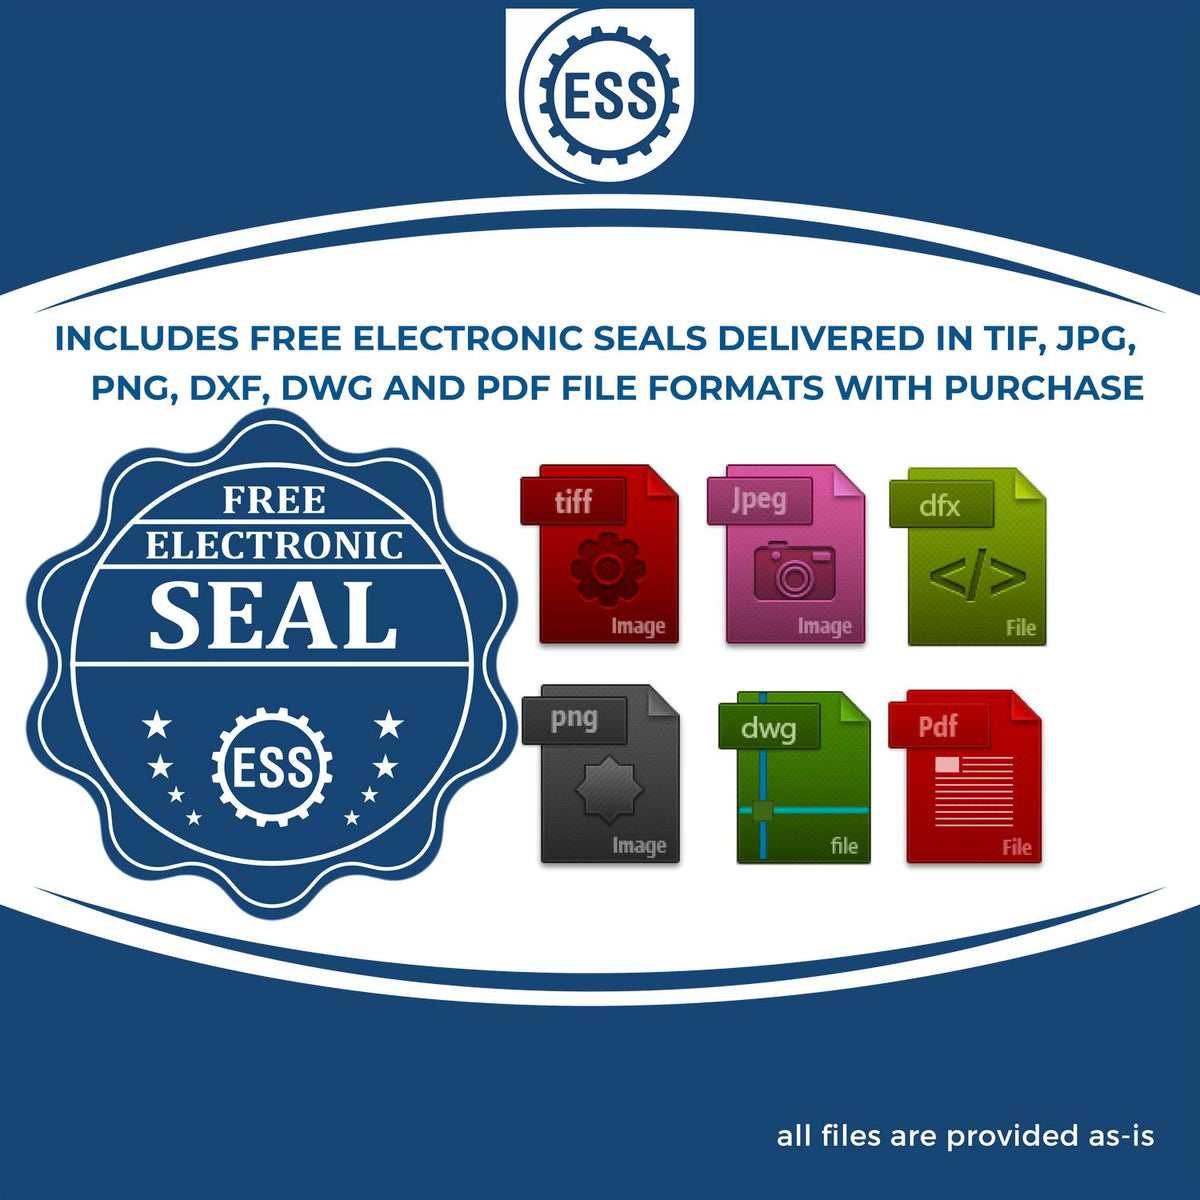 An infographic for the free electronic seal for the Slim Pre-Inked Louisiana Architect Seal Stamp illustrating the different file type icons such as DXF, DWG, TIF, JPG and PNG.